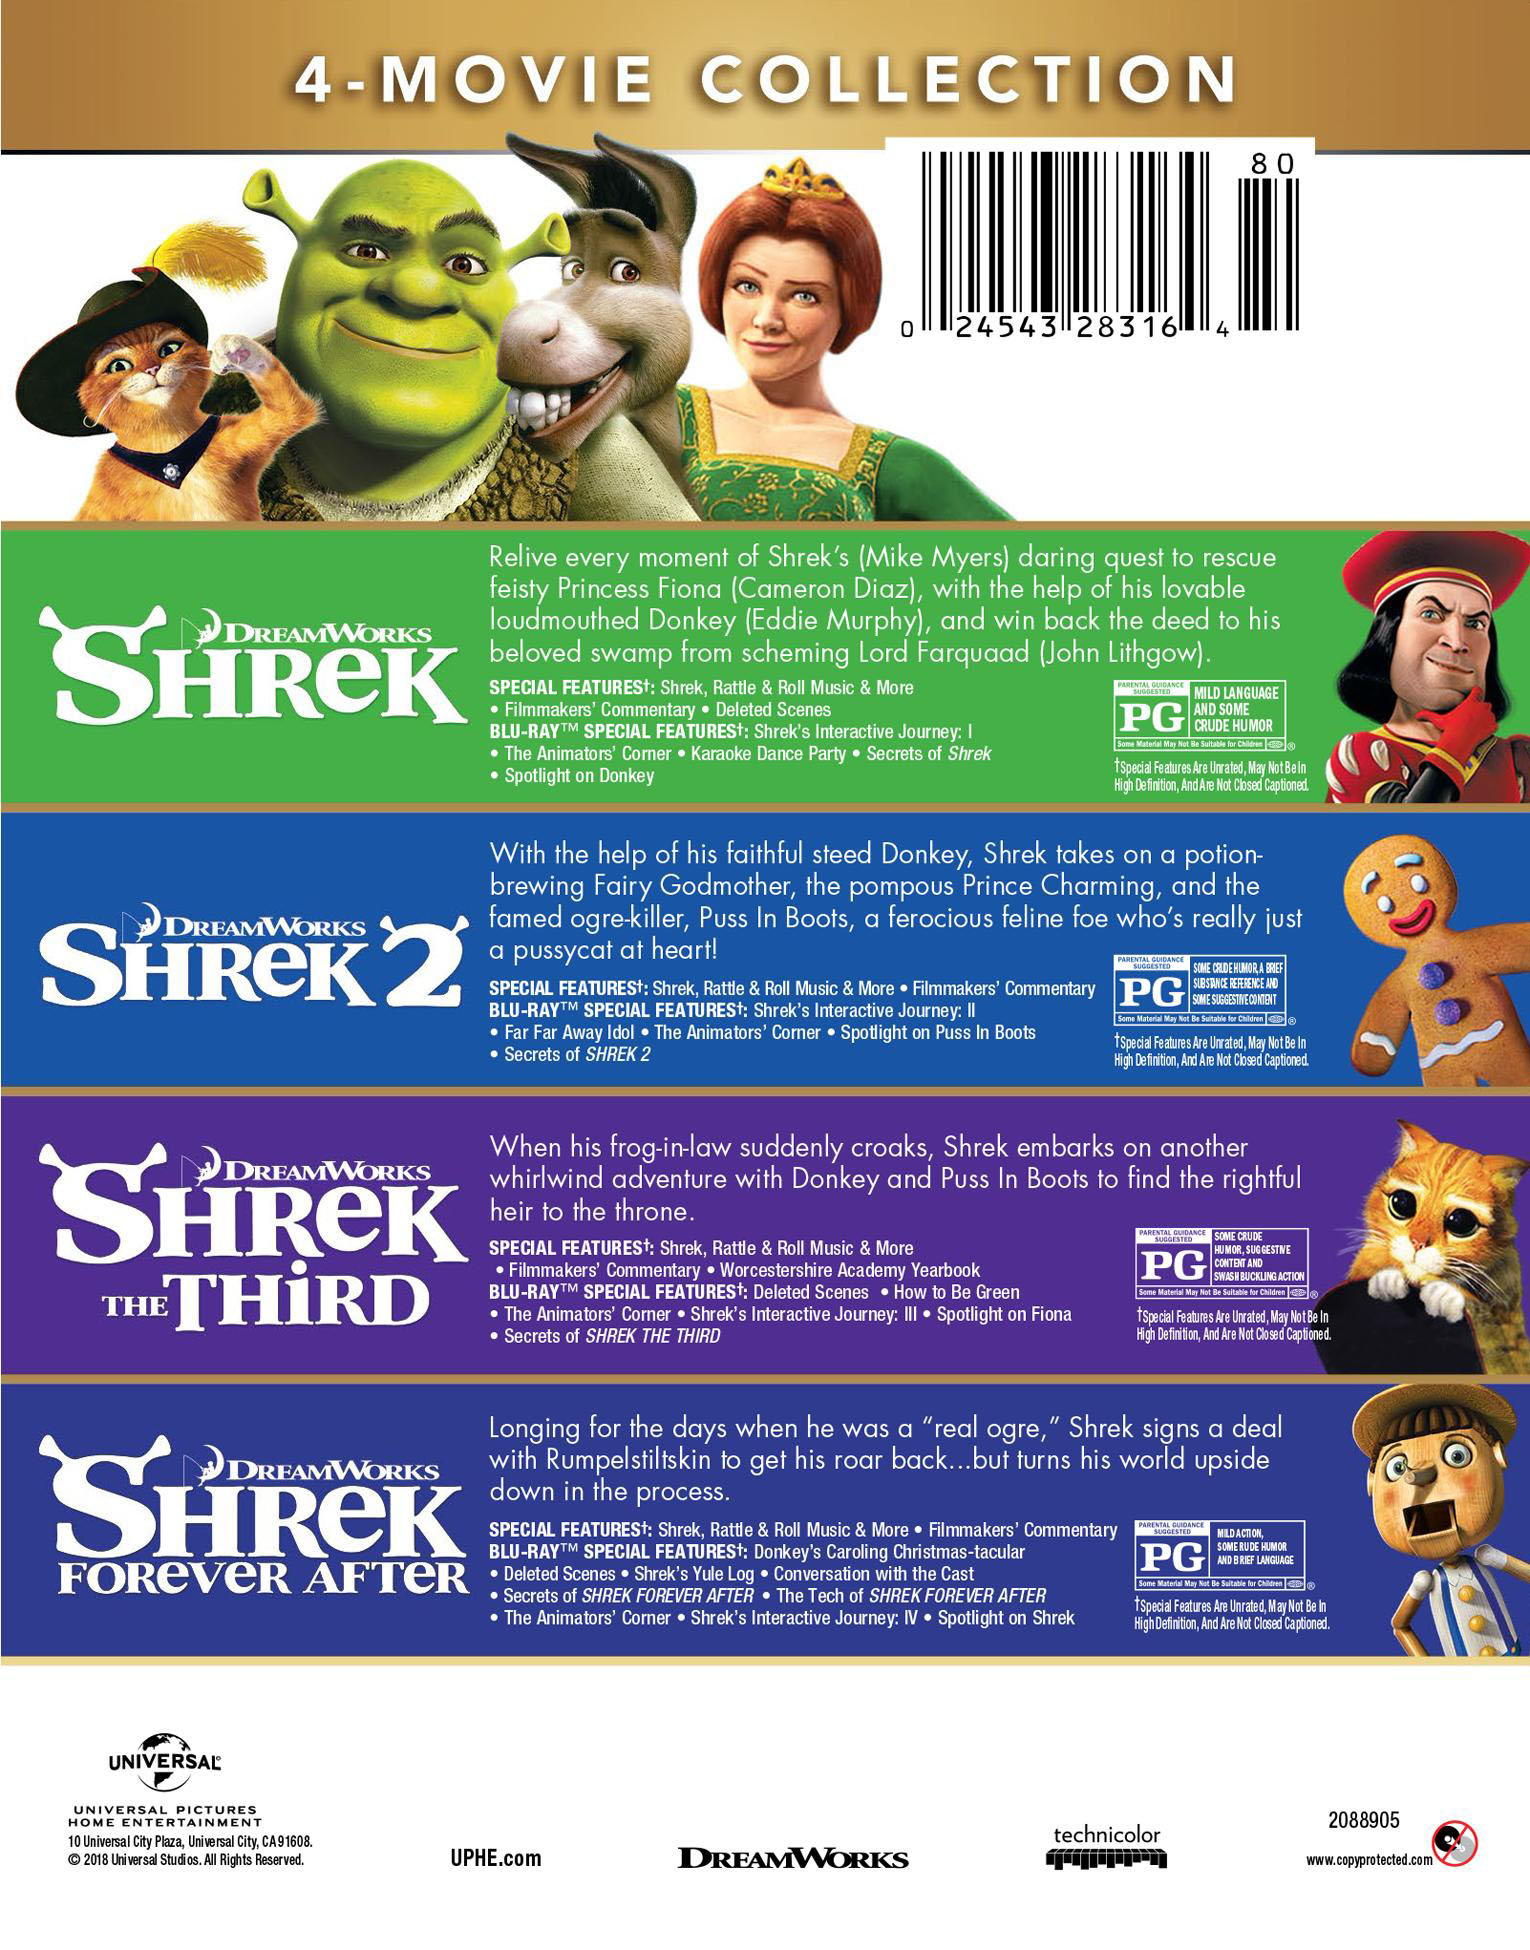 Shrek 4-Movie Collection (Blu-ray) - image 2 of 3